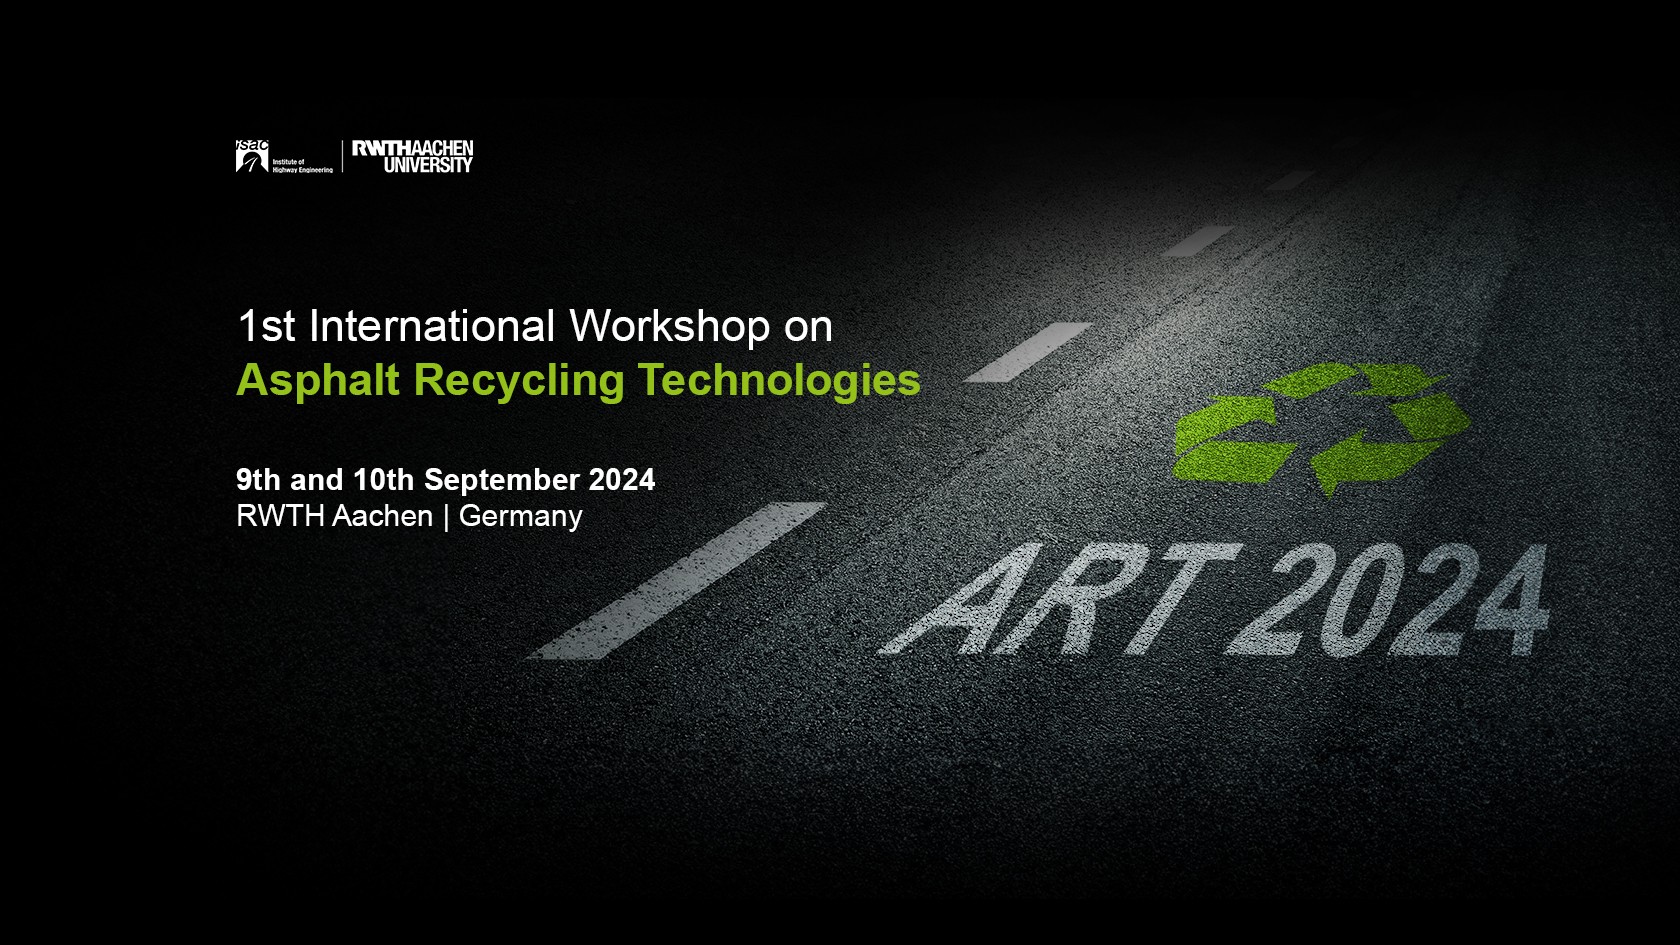 right green recycling logo incl. white lettering ART 2024 on asphalt embedded in black background, left lettering in white 1st International Workshop on Asphalt Recycling Technologies, 9th and 10th September 2024, RWTH Aachen, Germany